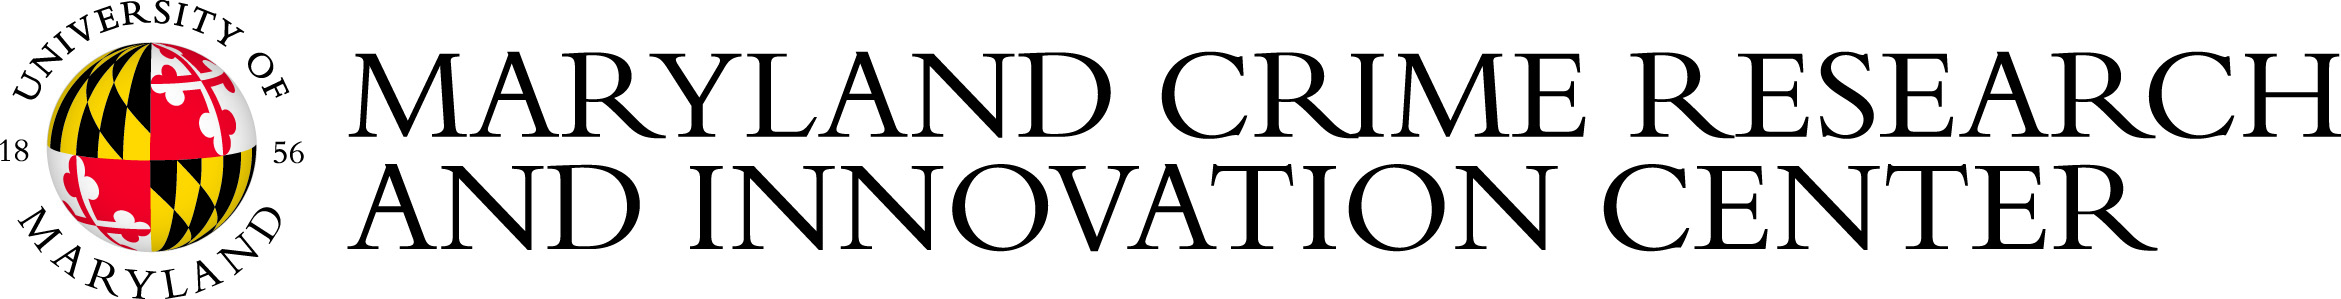 Maryland Crime Research and Innovation Center